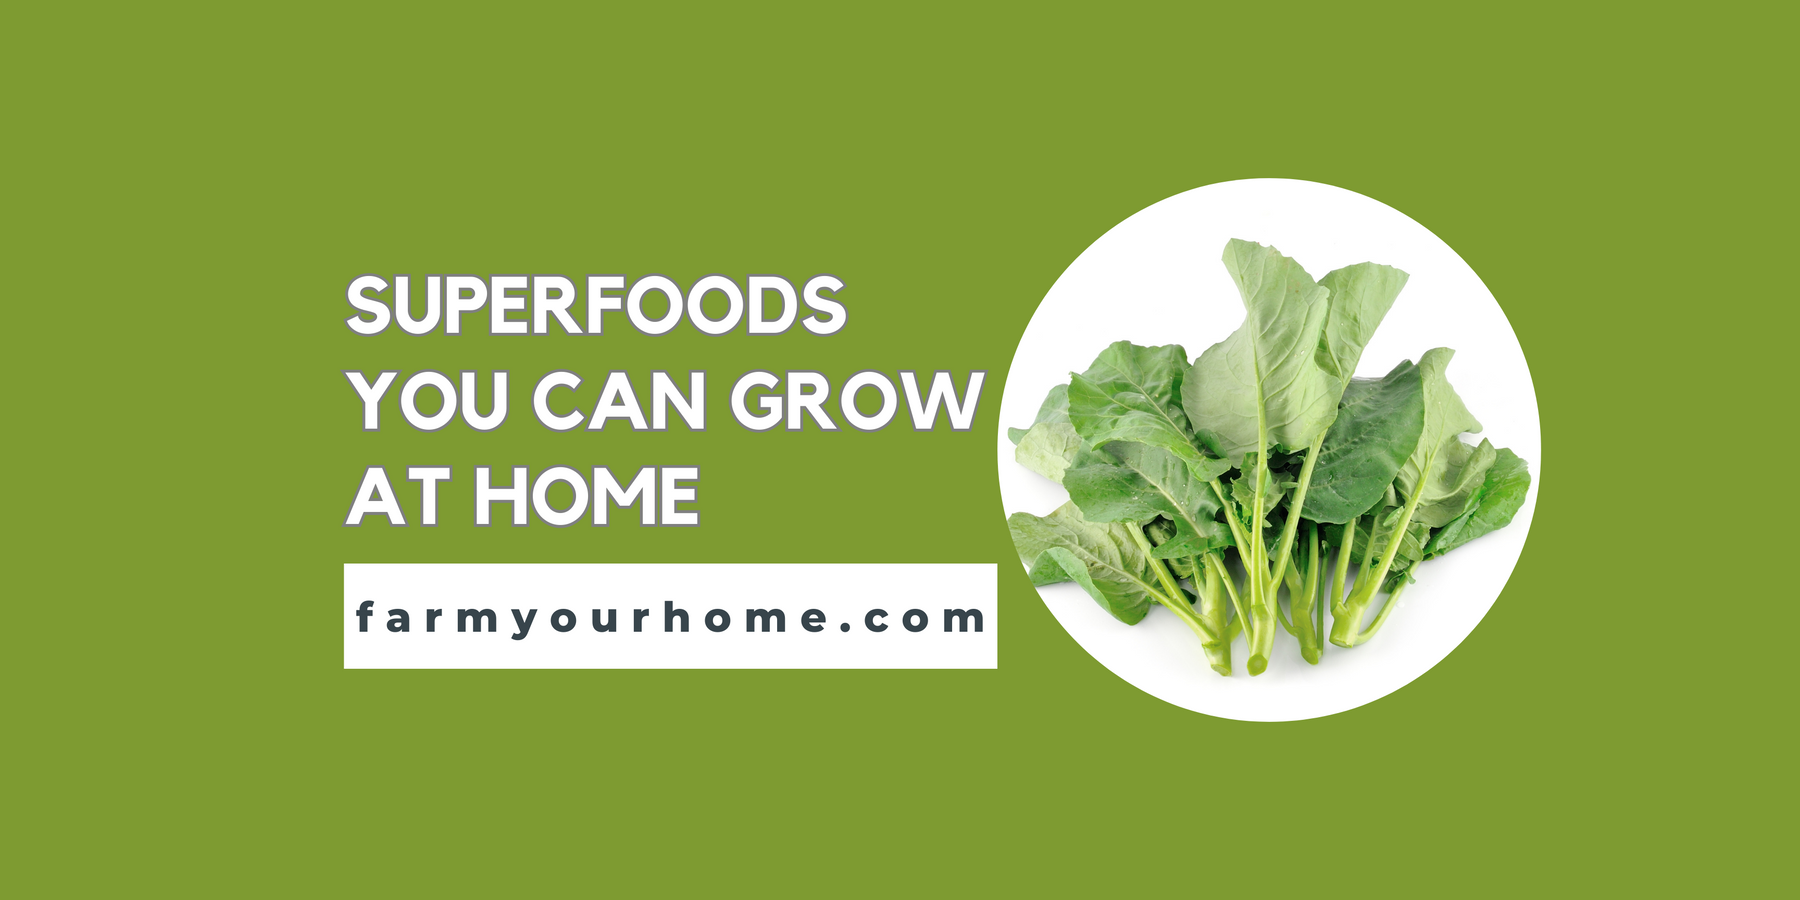 Superfoods You Can Grow At Home